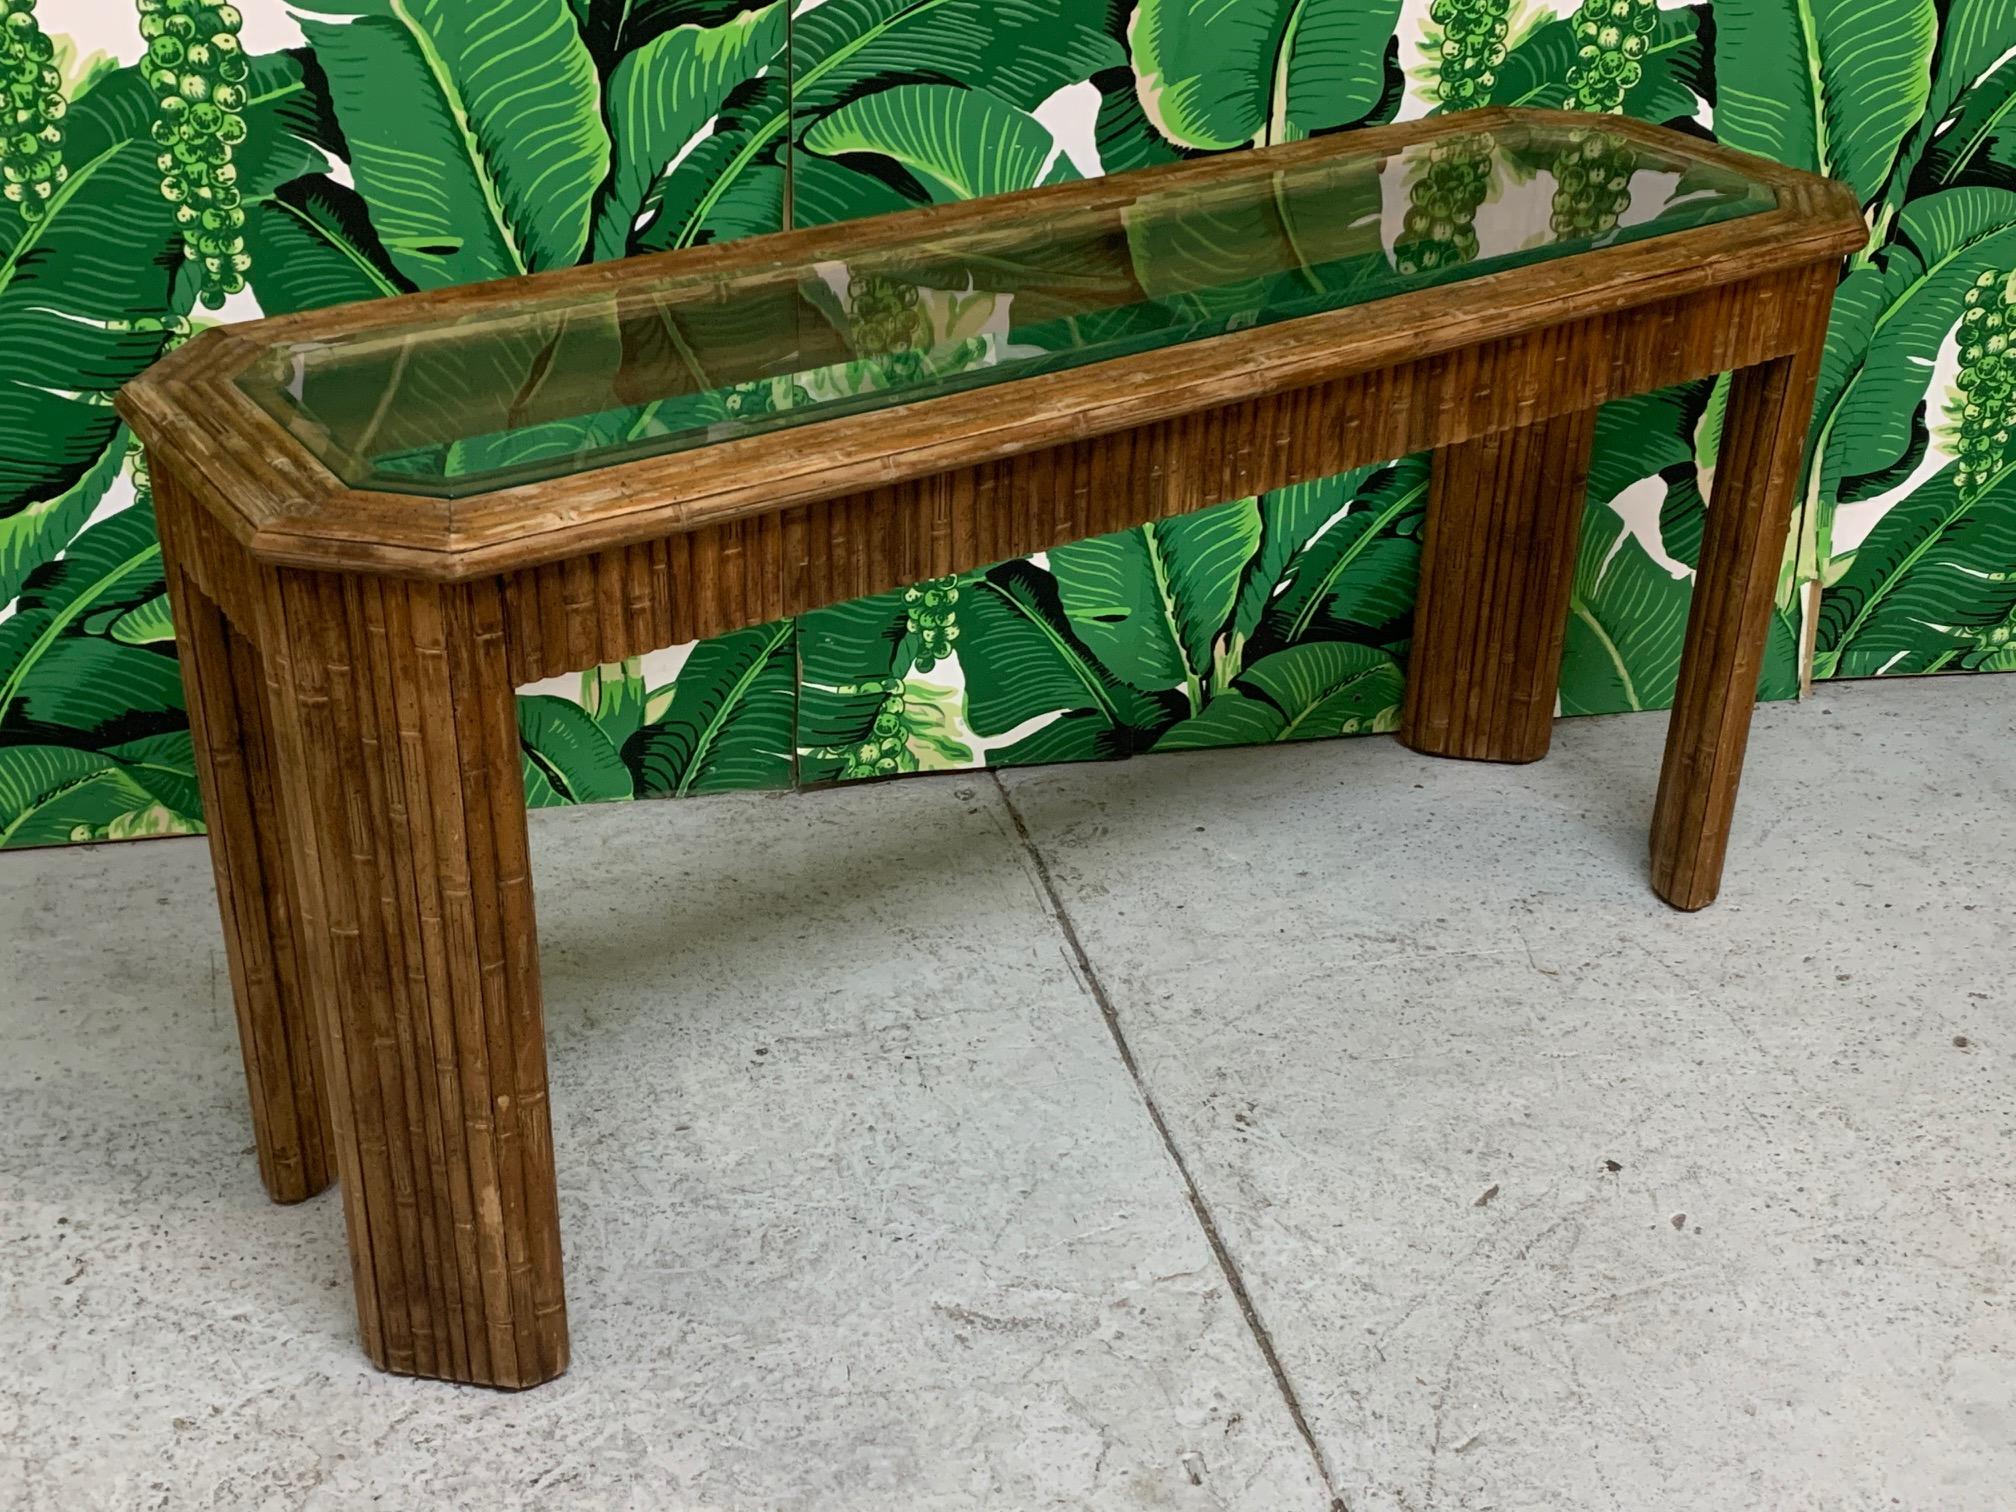 Vintage console table features full bamboo veneer and glass insert top. Good vintage condition with minor imperfections consistent with age.